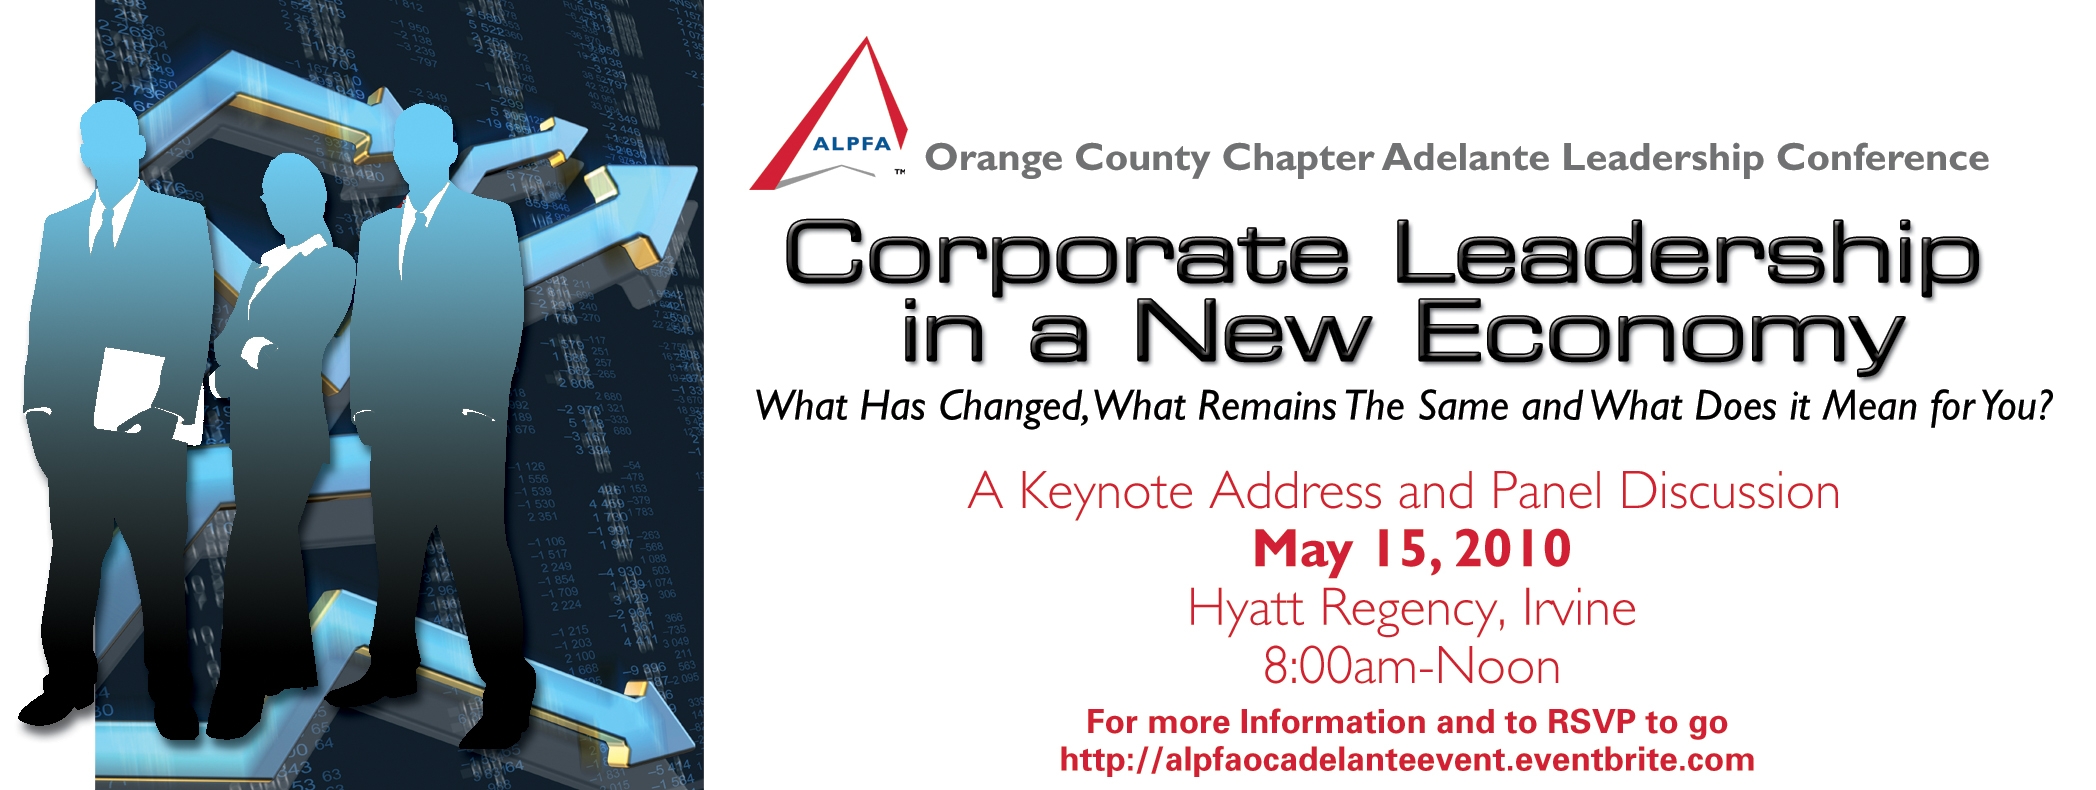 Corporate Leadership in a New Economy ALPFA Orange County (Association of Latino Professionals in Finance and Accounting) is pleased to present a half-day leadership conference titled Corporate Leadership in a […]